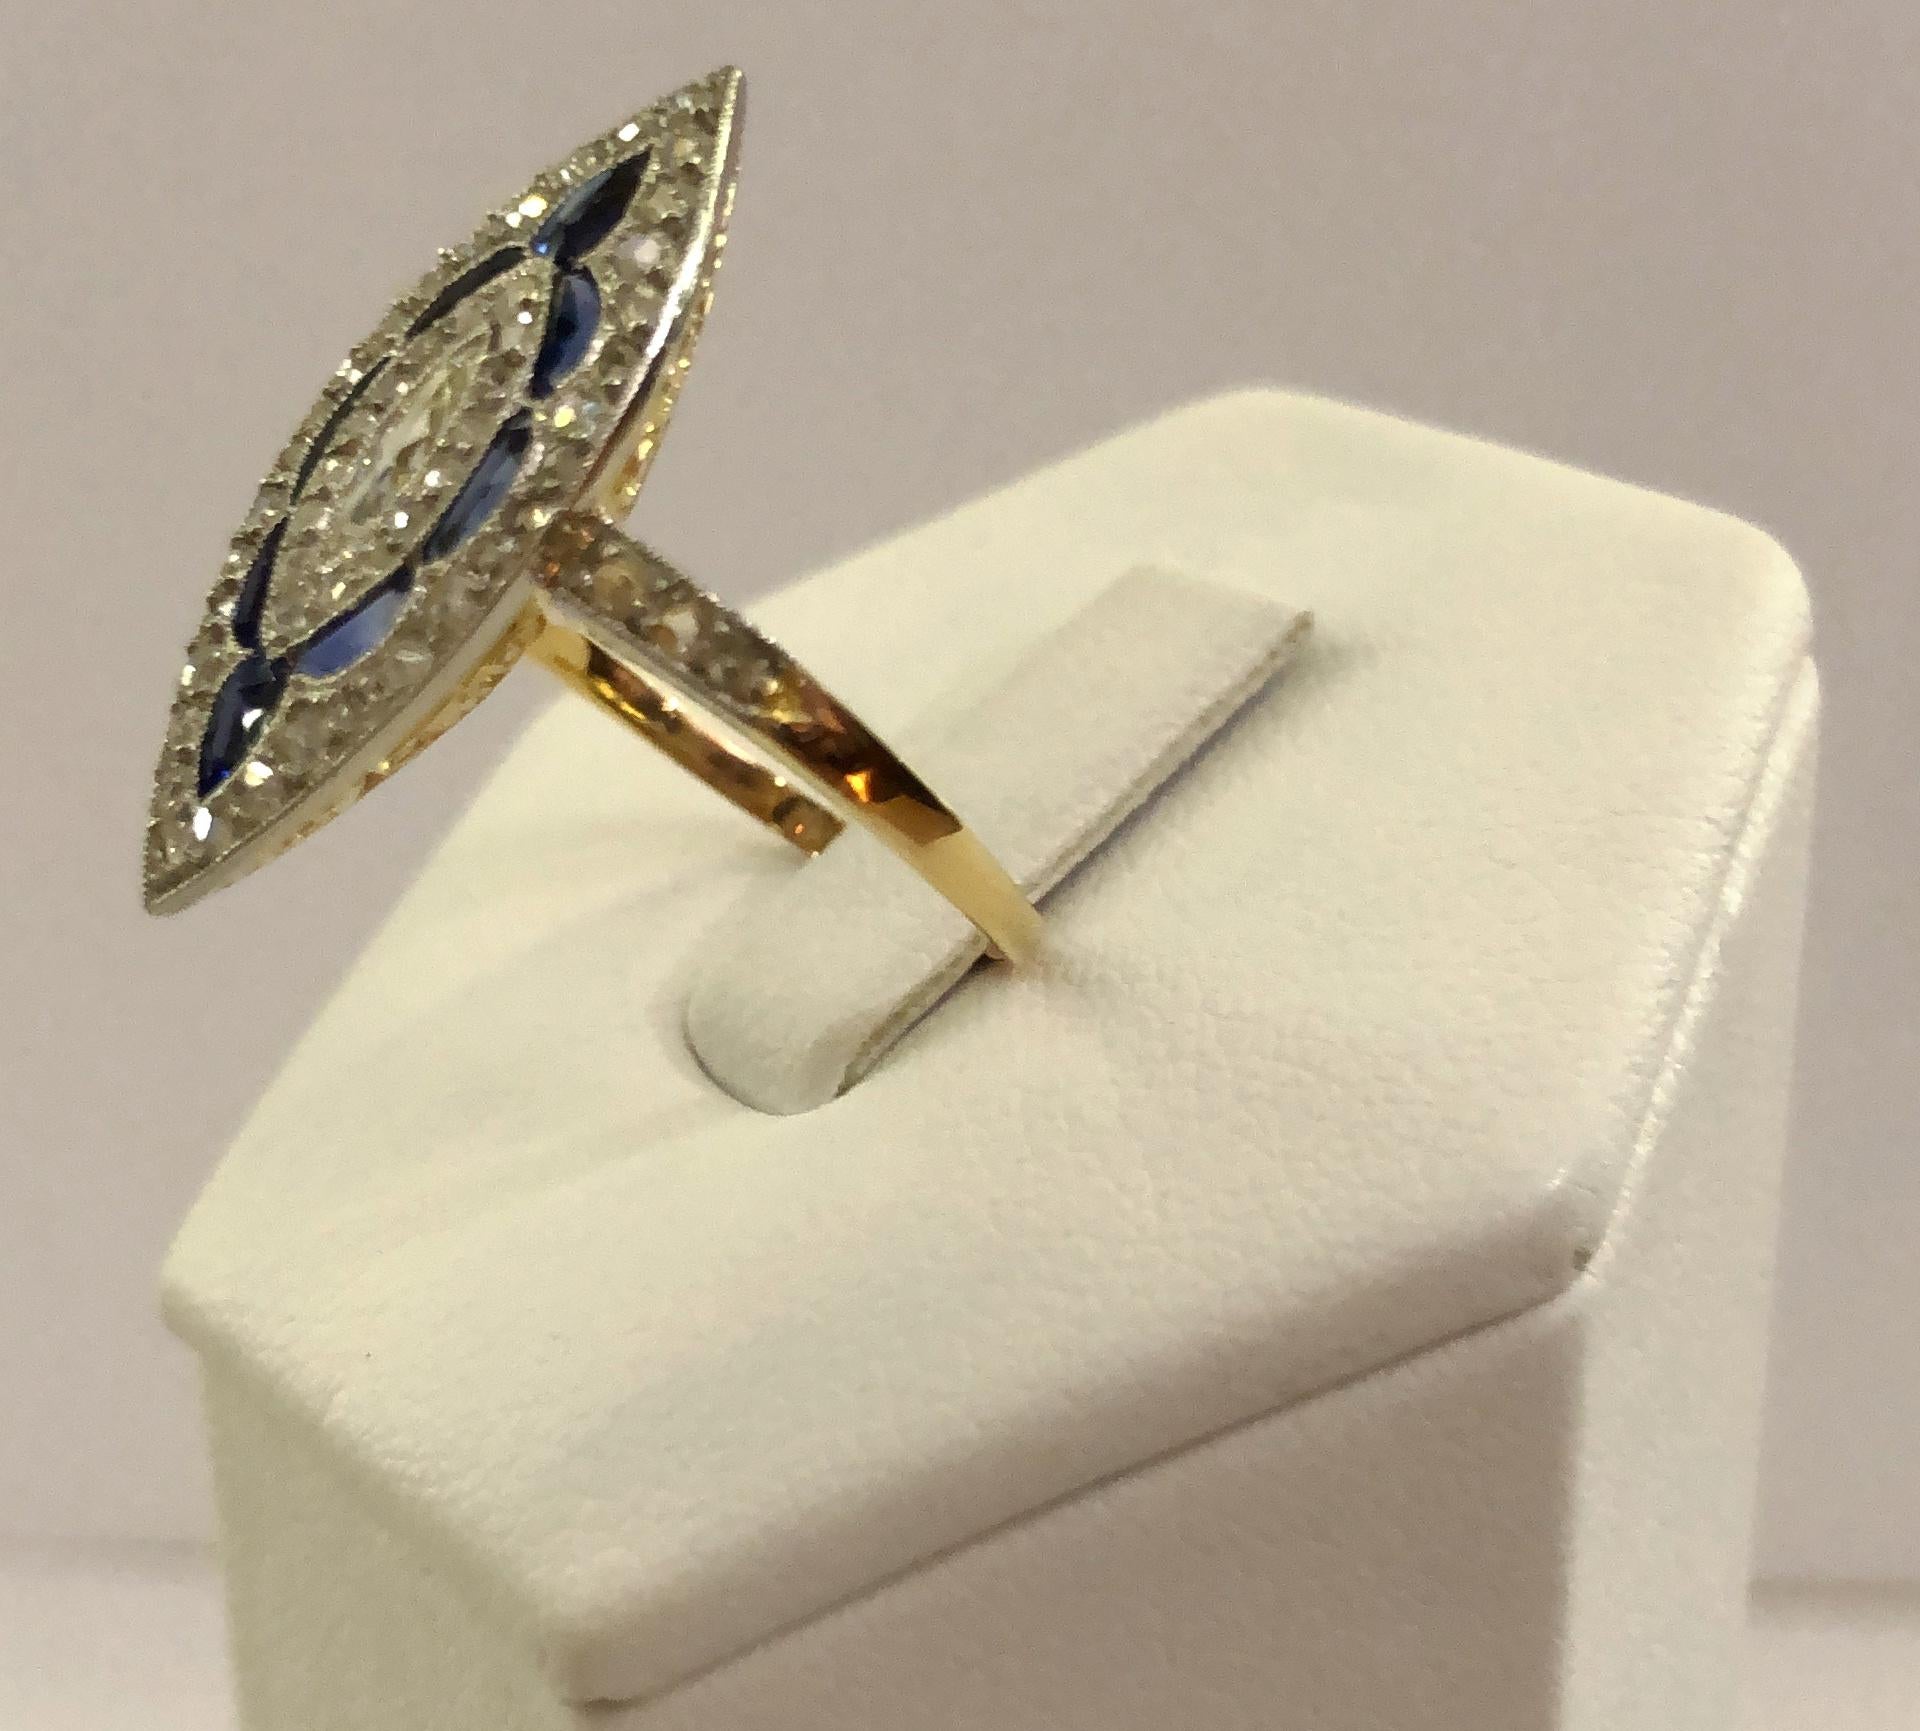 Vintage 18 karat gold Figaro model ring, with a central large diamond of 0.2 karats and surrounding sapphire and diamonds on the contour, Italy 1890-1920s
Ring size US 6.5-7